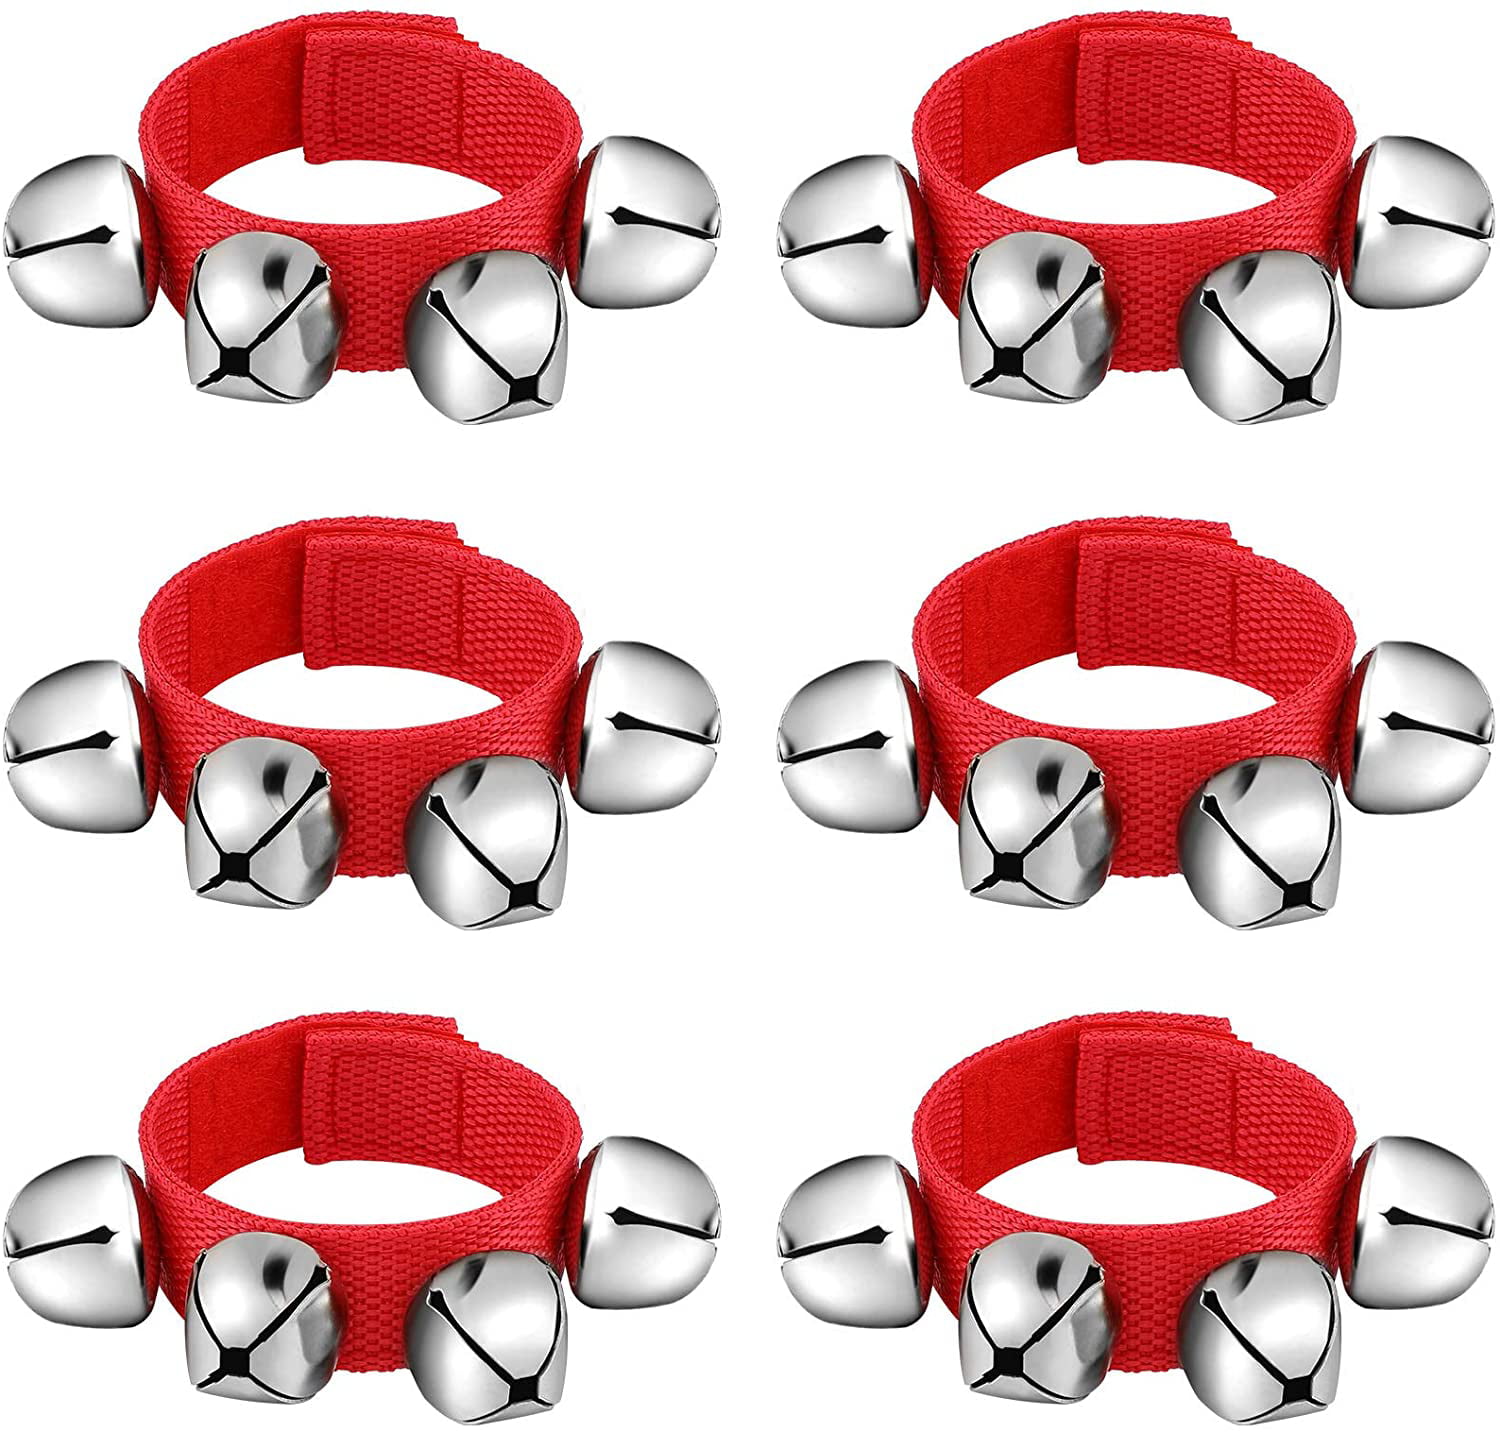 6 Pieces Christmas Band Wrist Bells Bracelets Jingle Musical Ankle Bells Instrument Percussion Rhythm for Christmas Party Favors Festival Accessories Red 